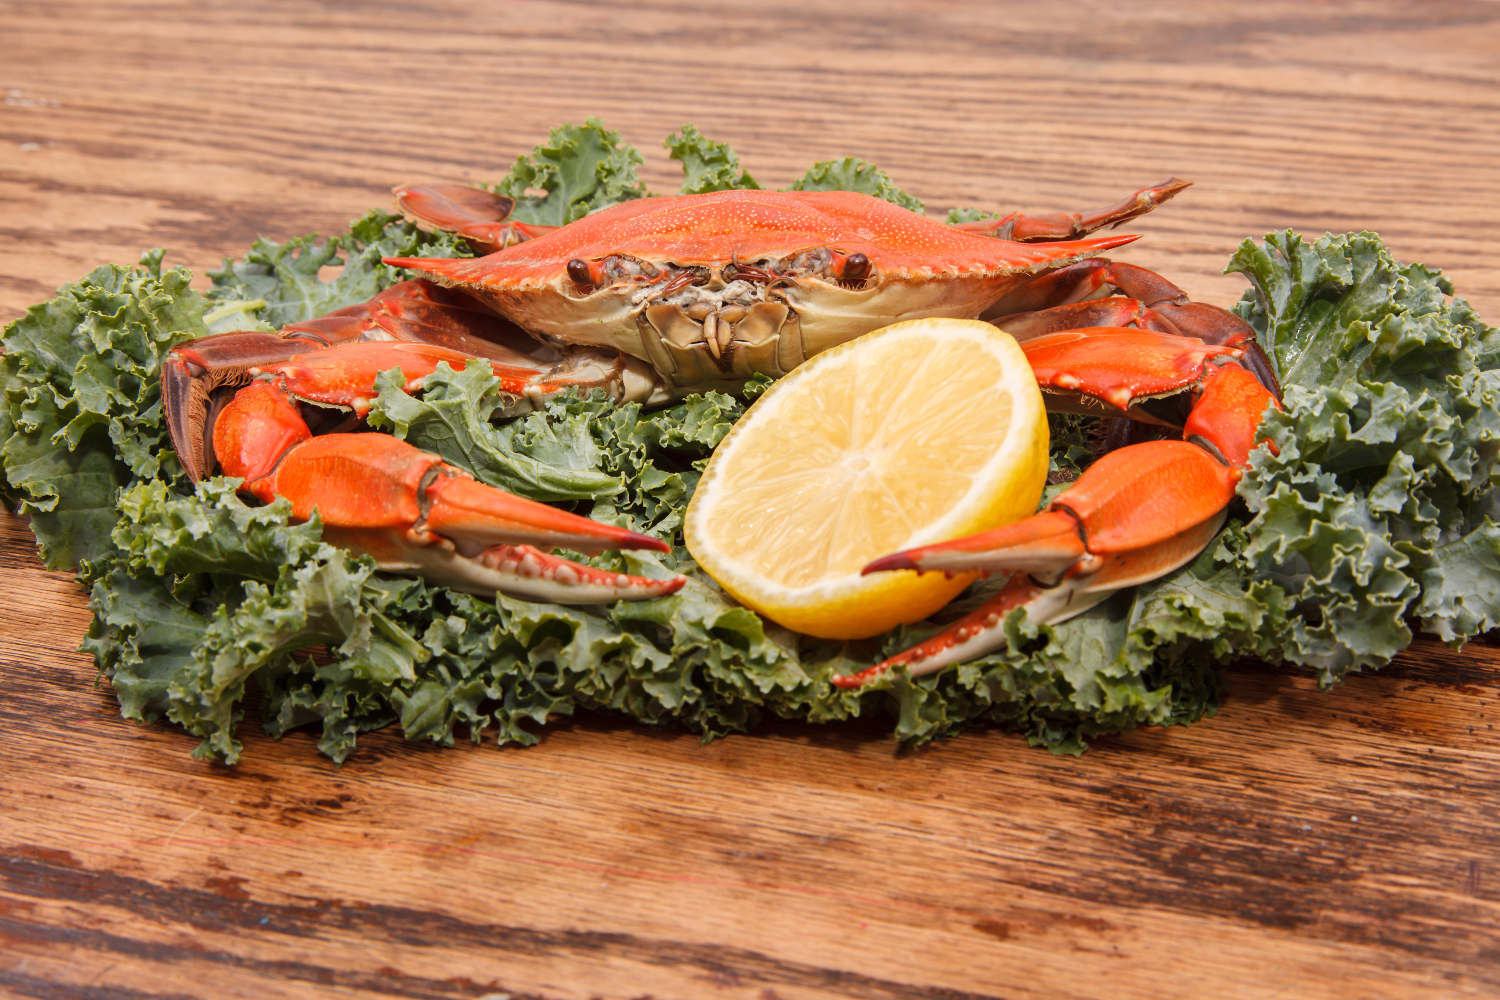 Steamed Blue Crab, one of the symbols of Maryland State and Ocean City, MD with lemon slice and garnished with kale on a wooden table